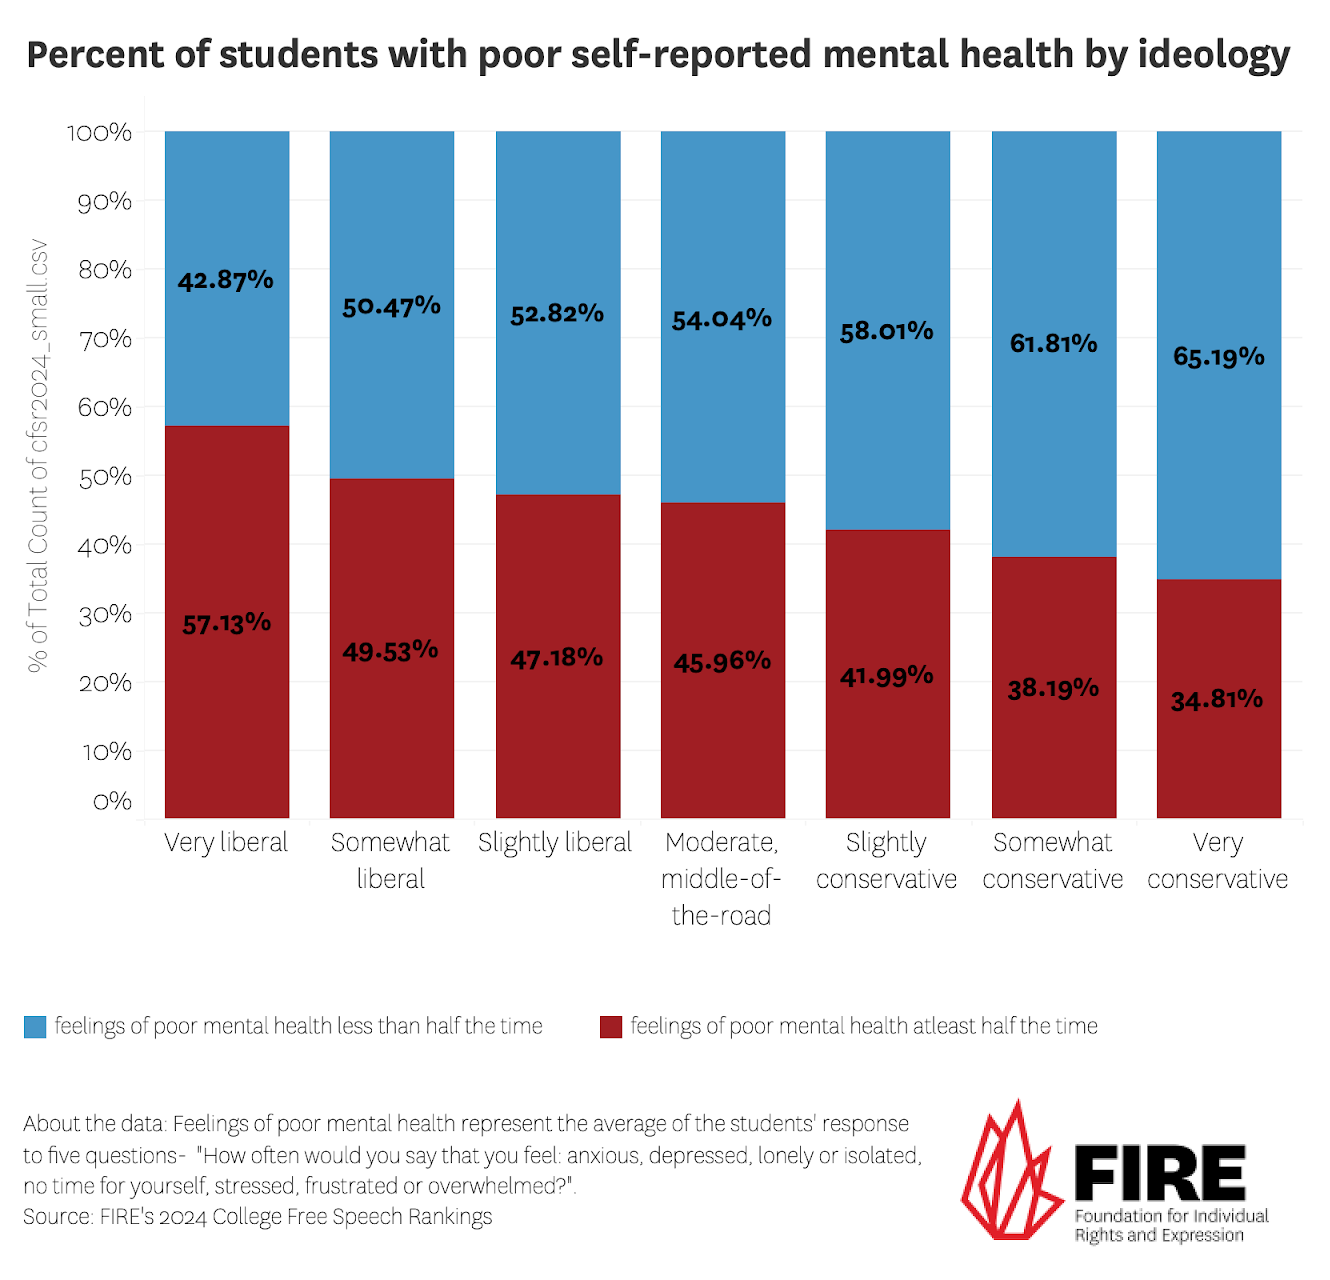 Percent of students with poor self-reported mental health by ideology 